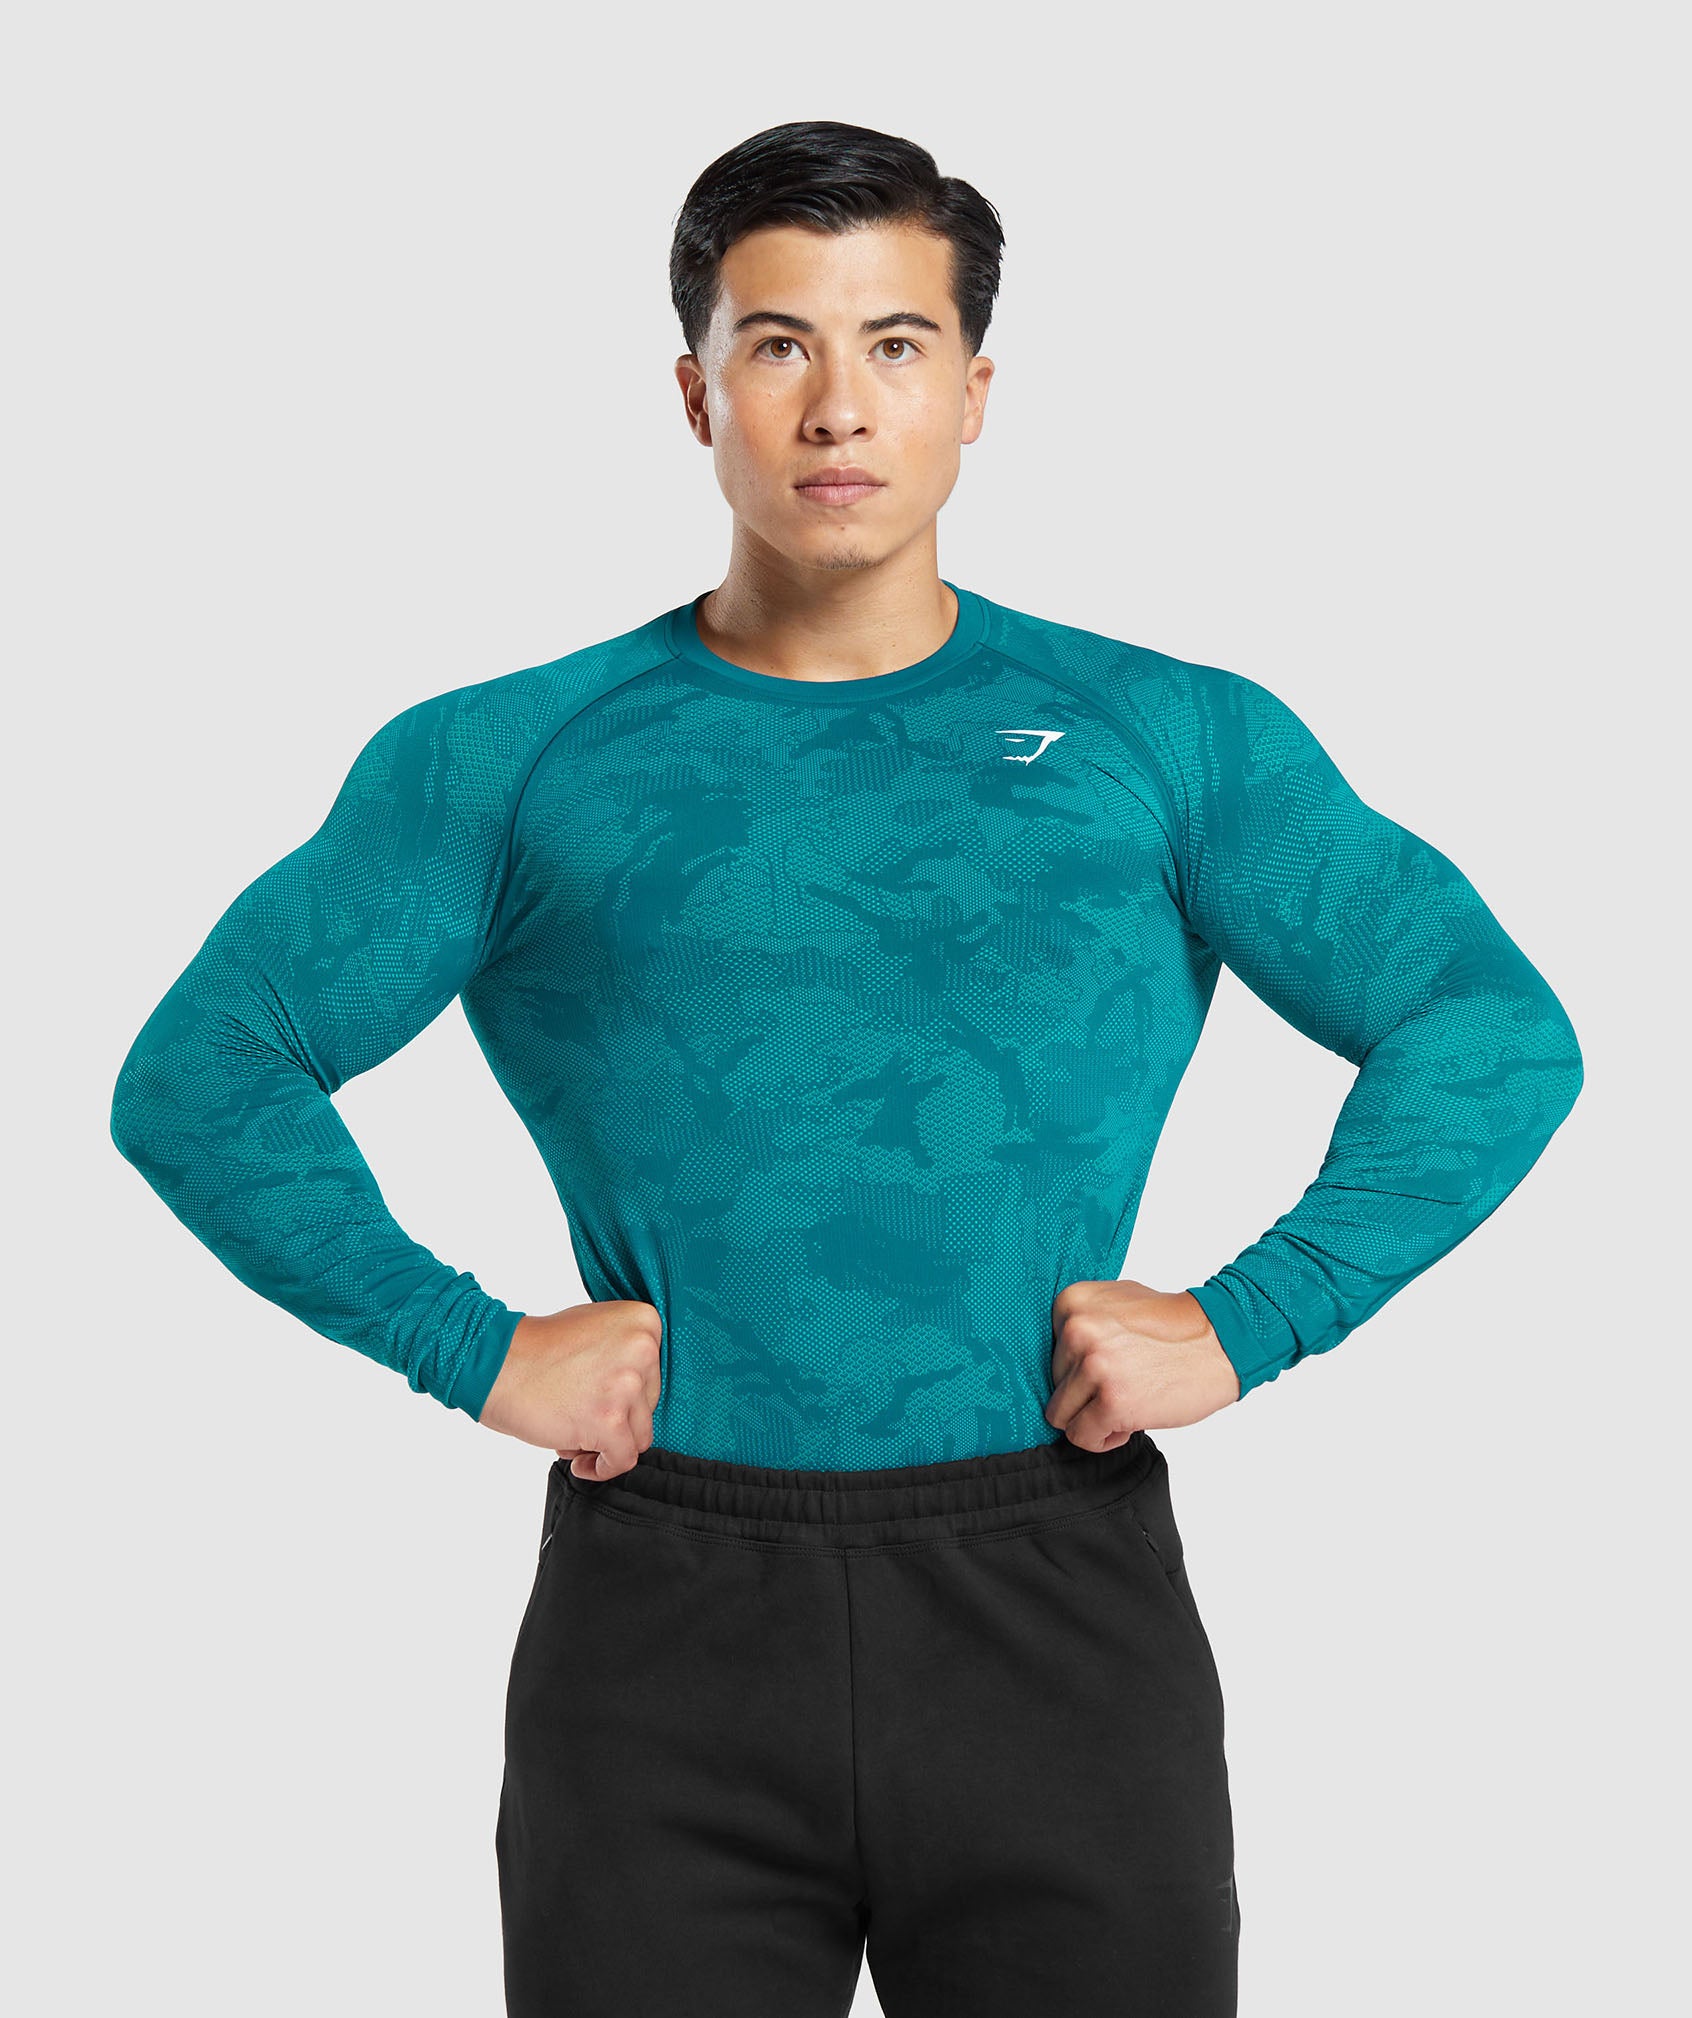 Geo Seamless Long Sleeve T-Shirt in {{variantColor} is out of stock